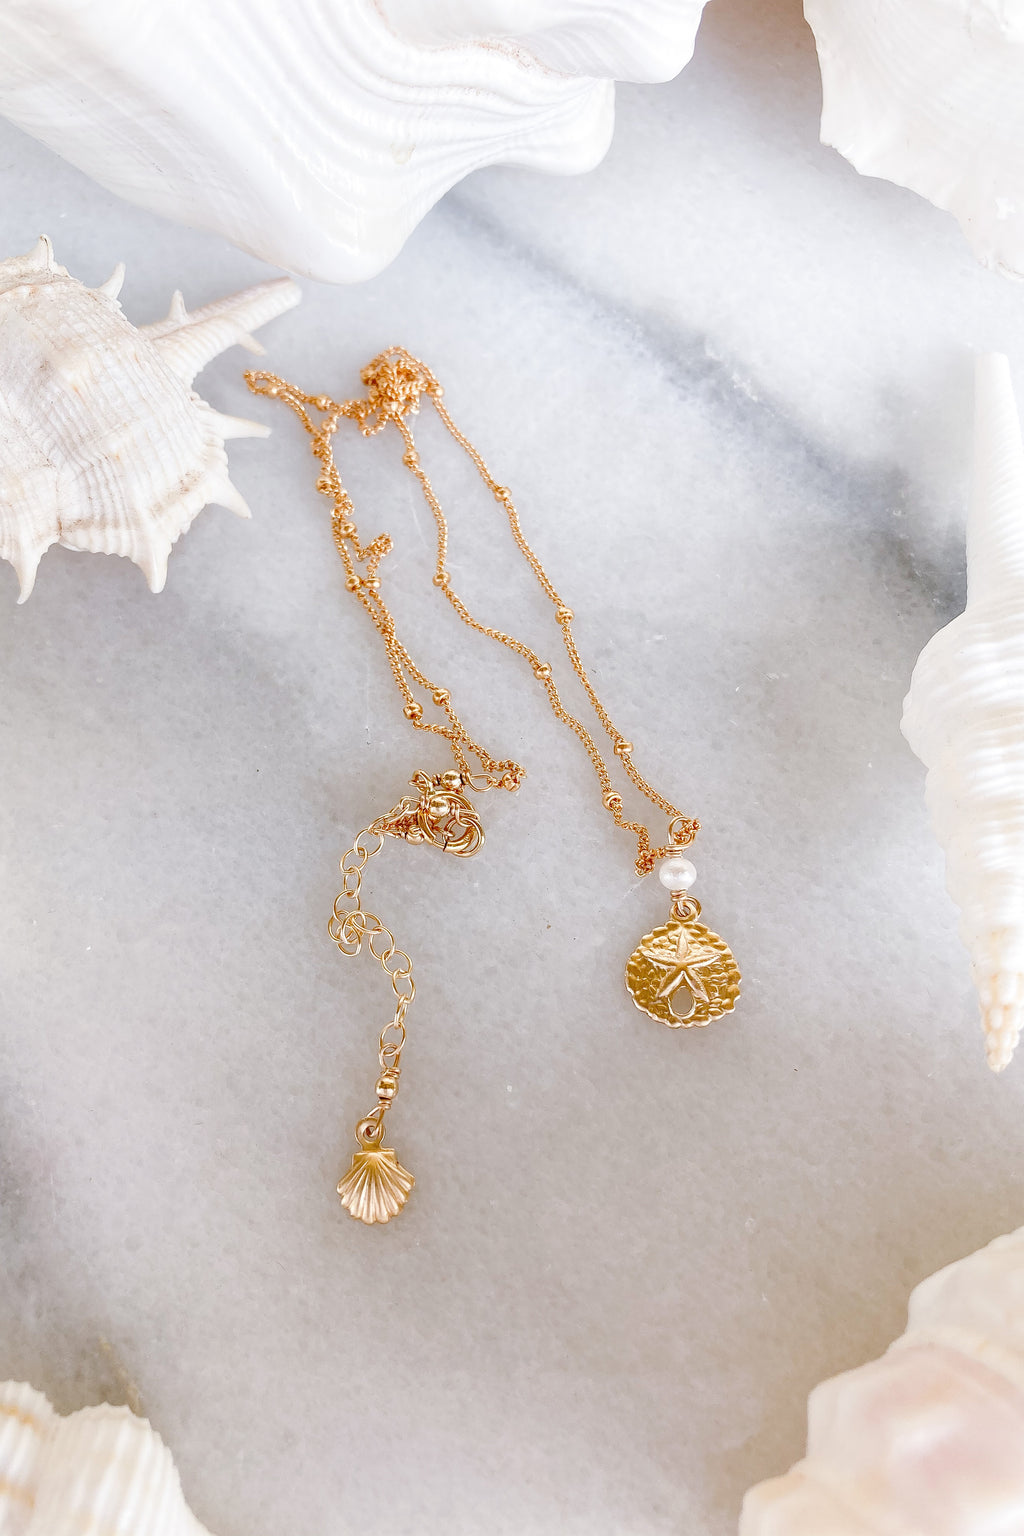 Sand Dollar Pearl Satellite Necklace  - Gold Fill